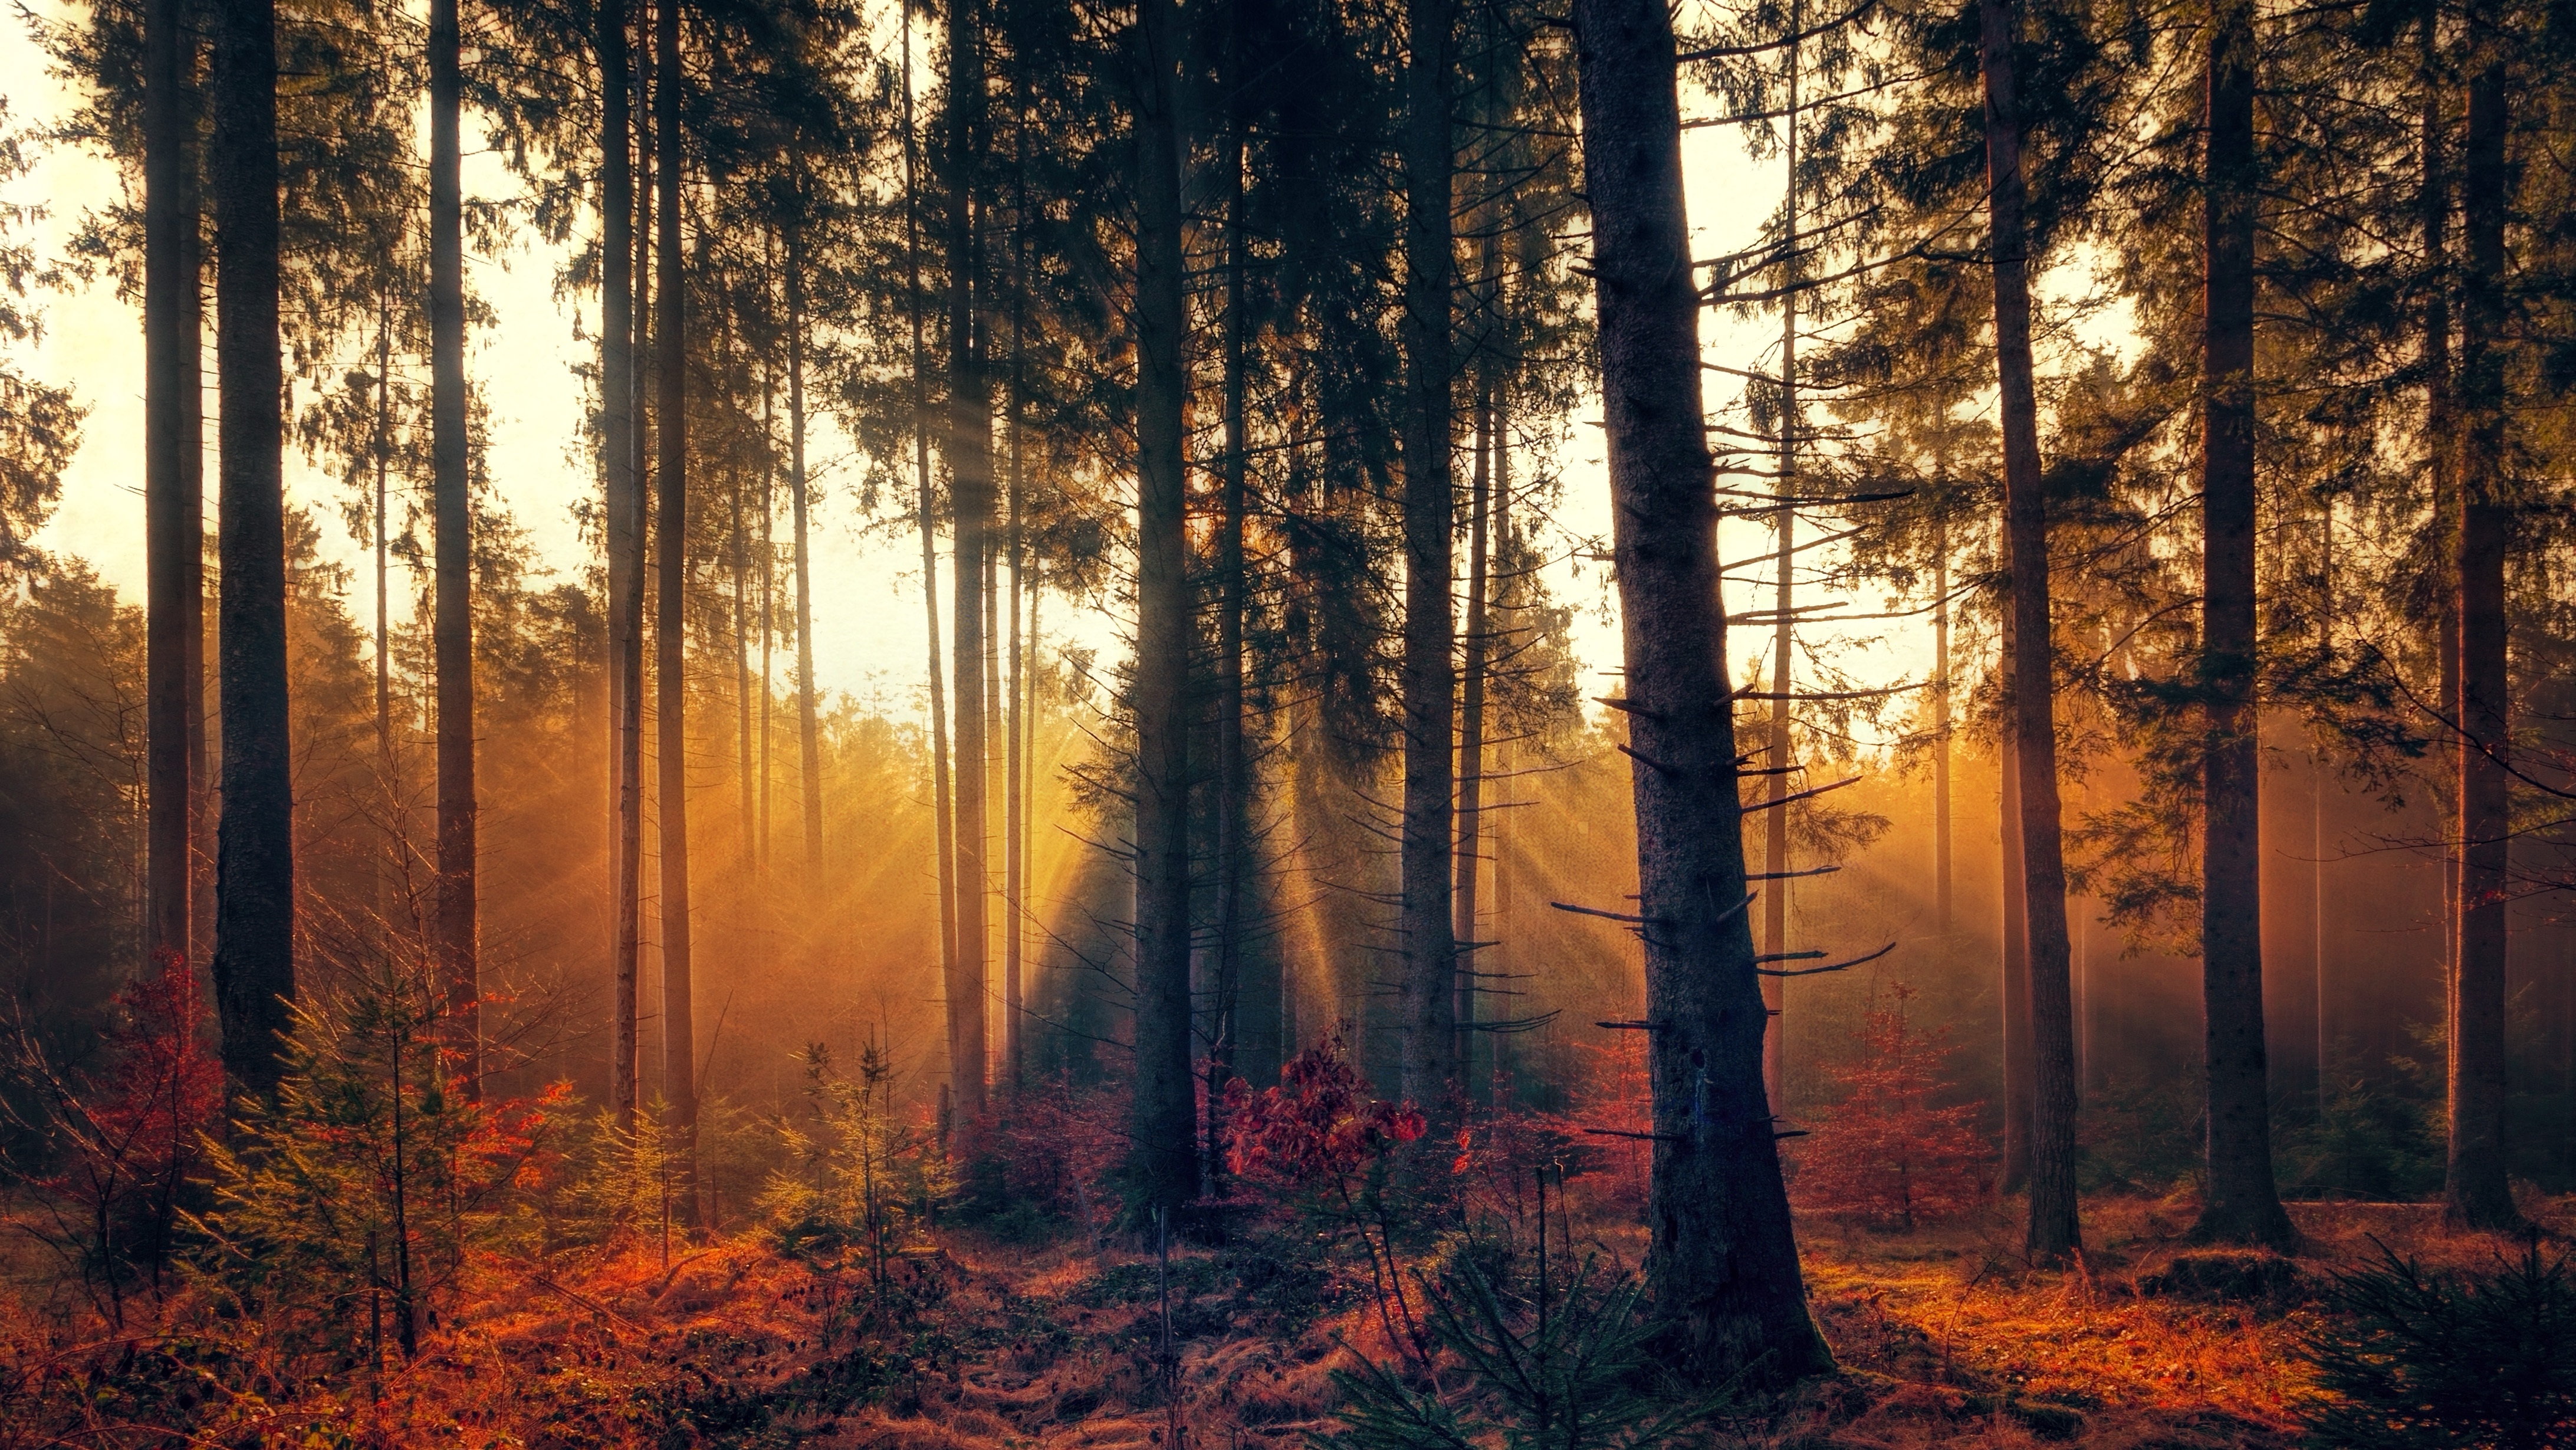 70126 download wallpaper nature, trees, autumn, forest, fog screensavers and pictures for free